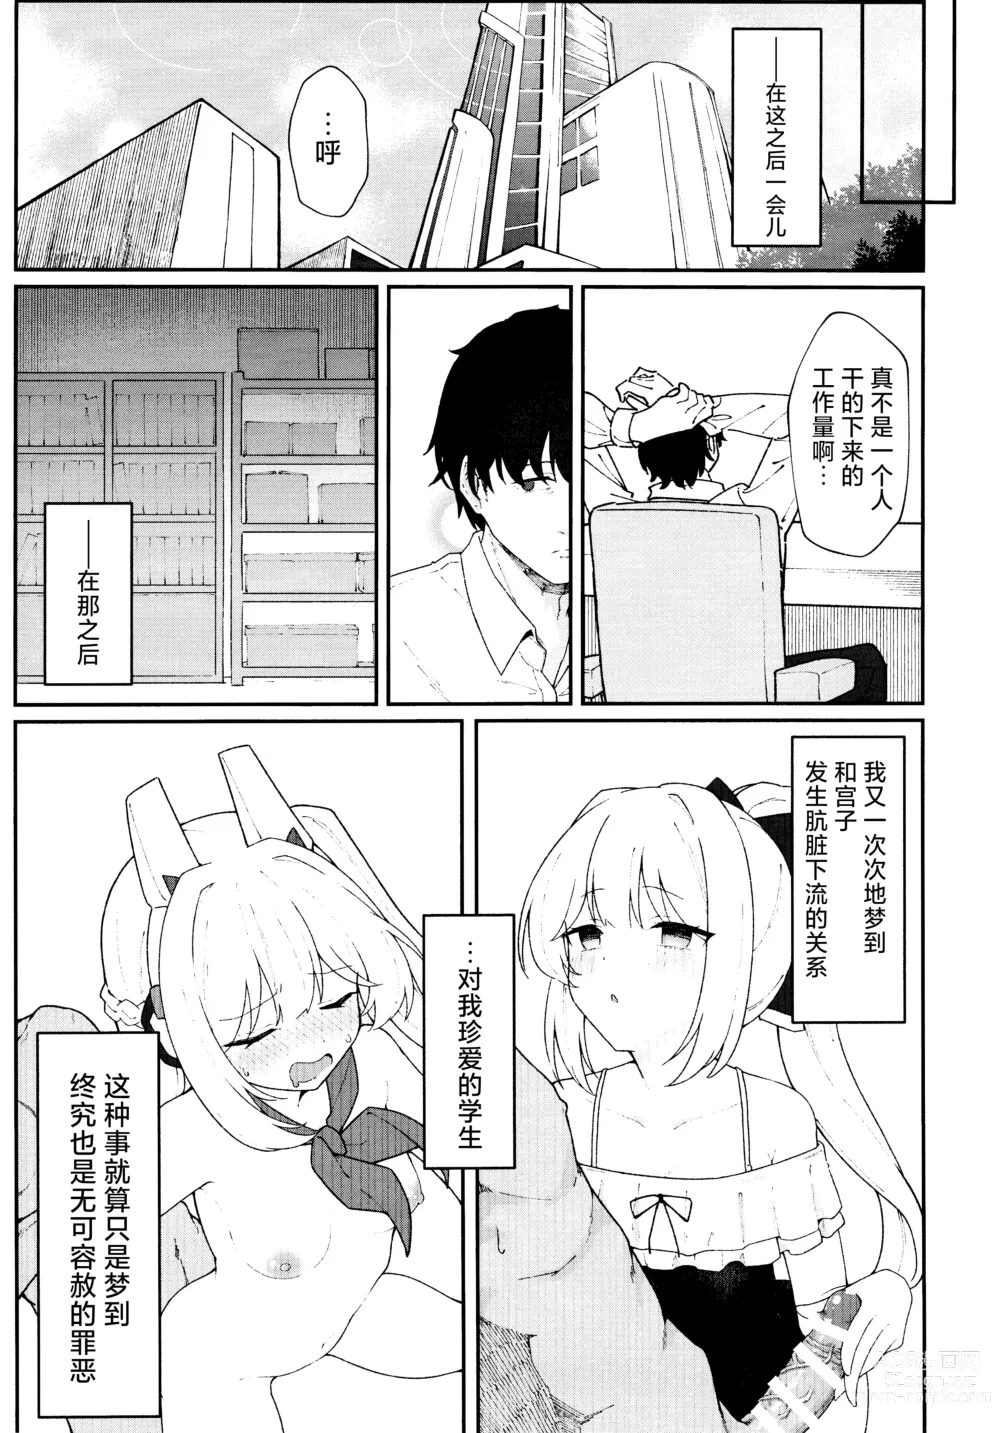 Page 11 of doujinshi 堕入兔穴